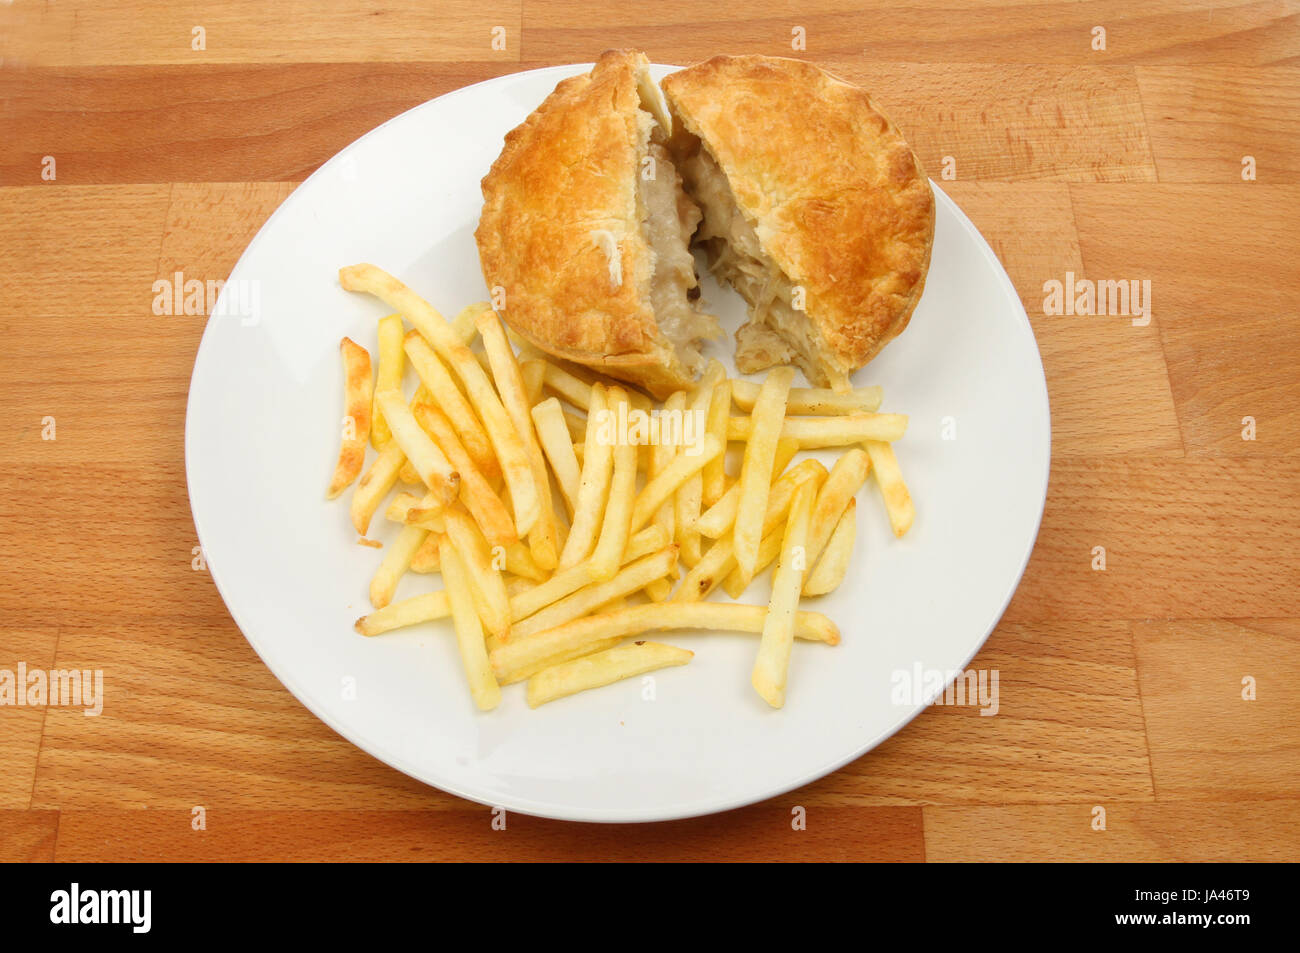 Chicken pie and fries on a plate on a wooden tabletop Stock Photo